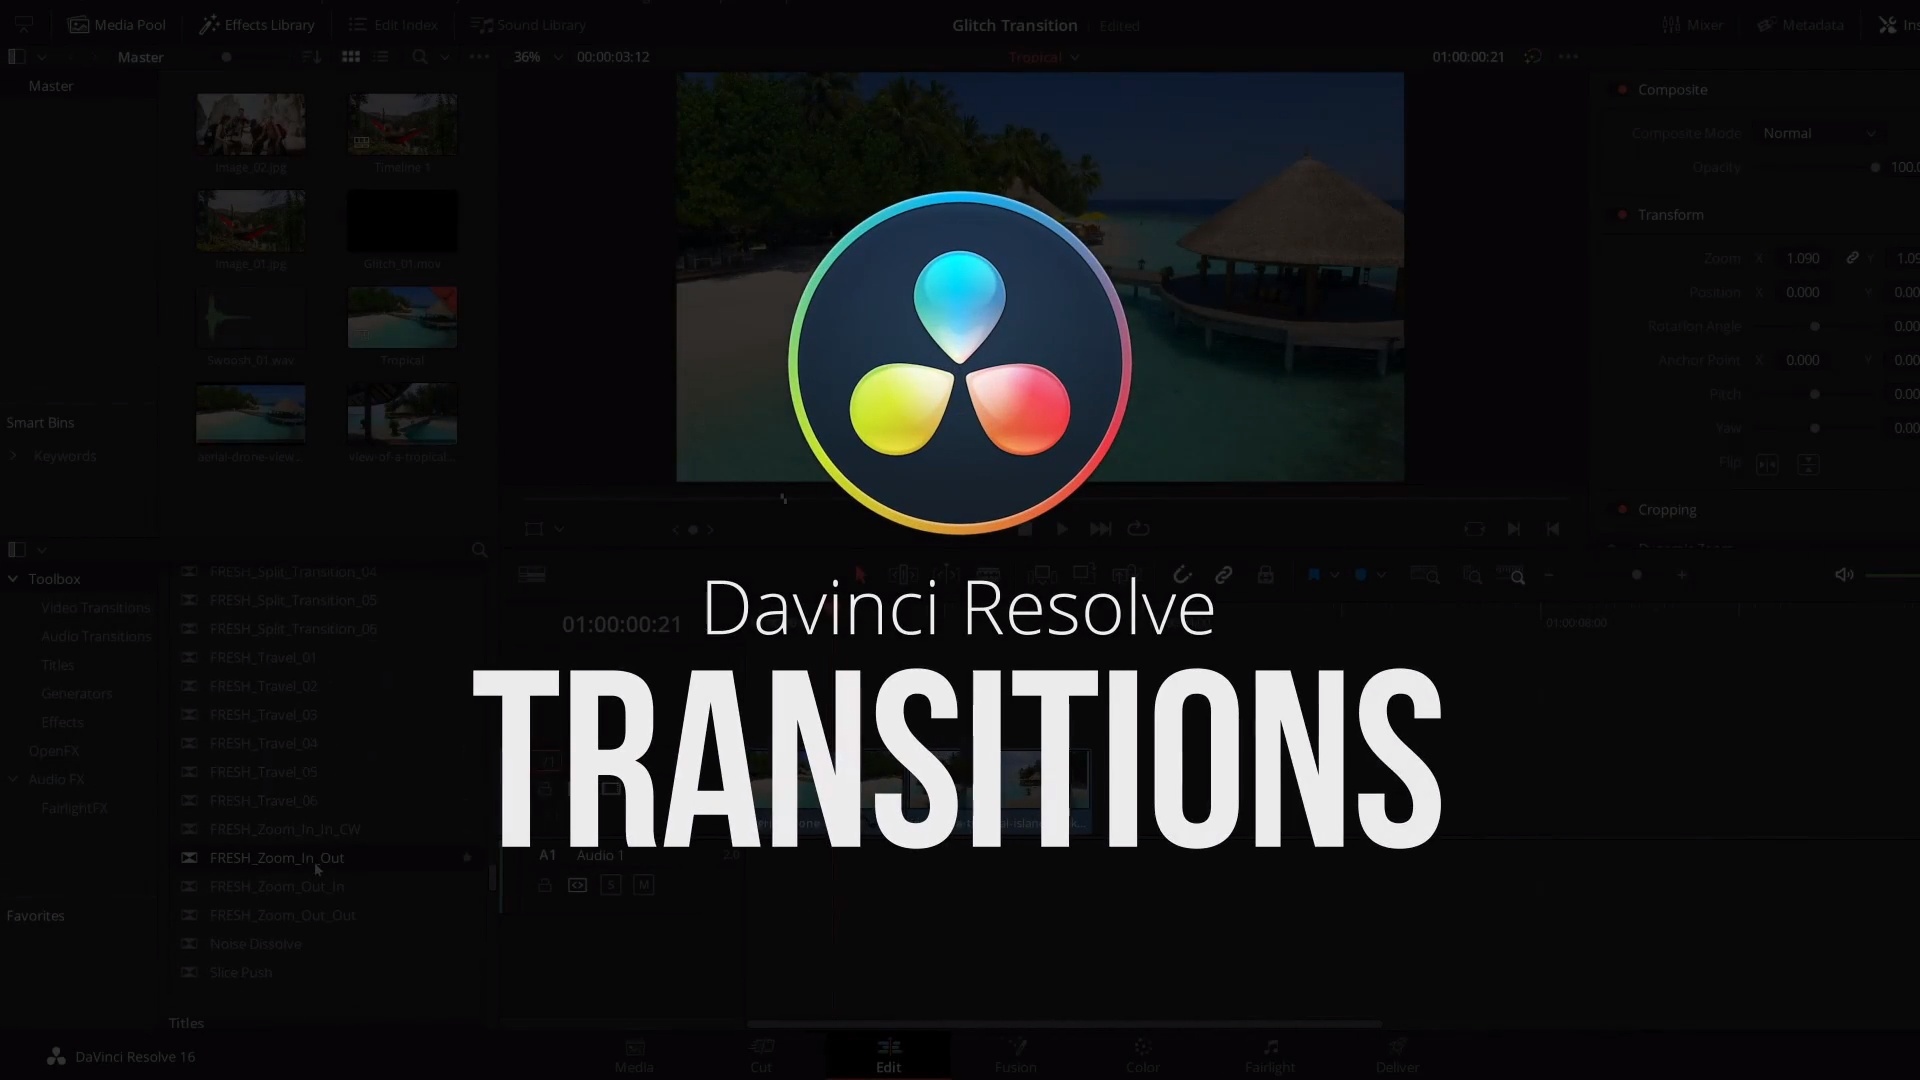 seamless transitions for davinci resolve free download